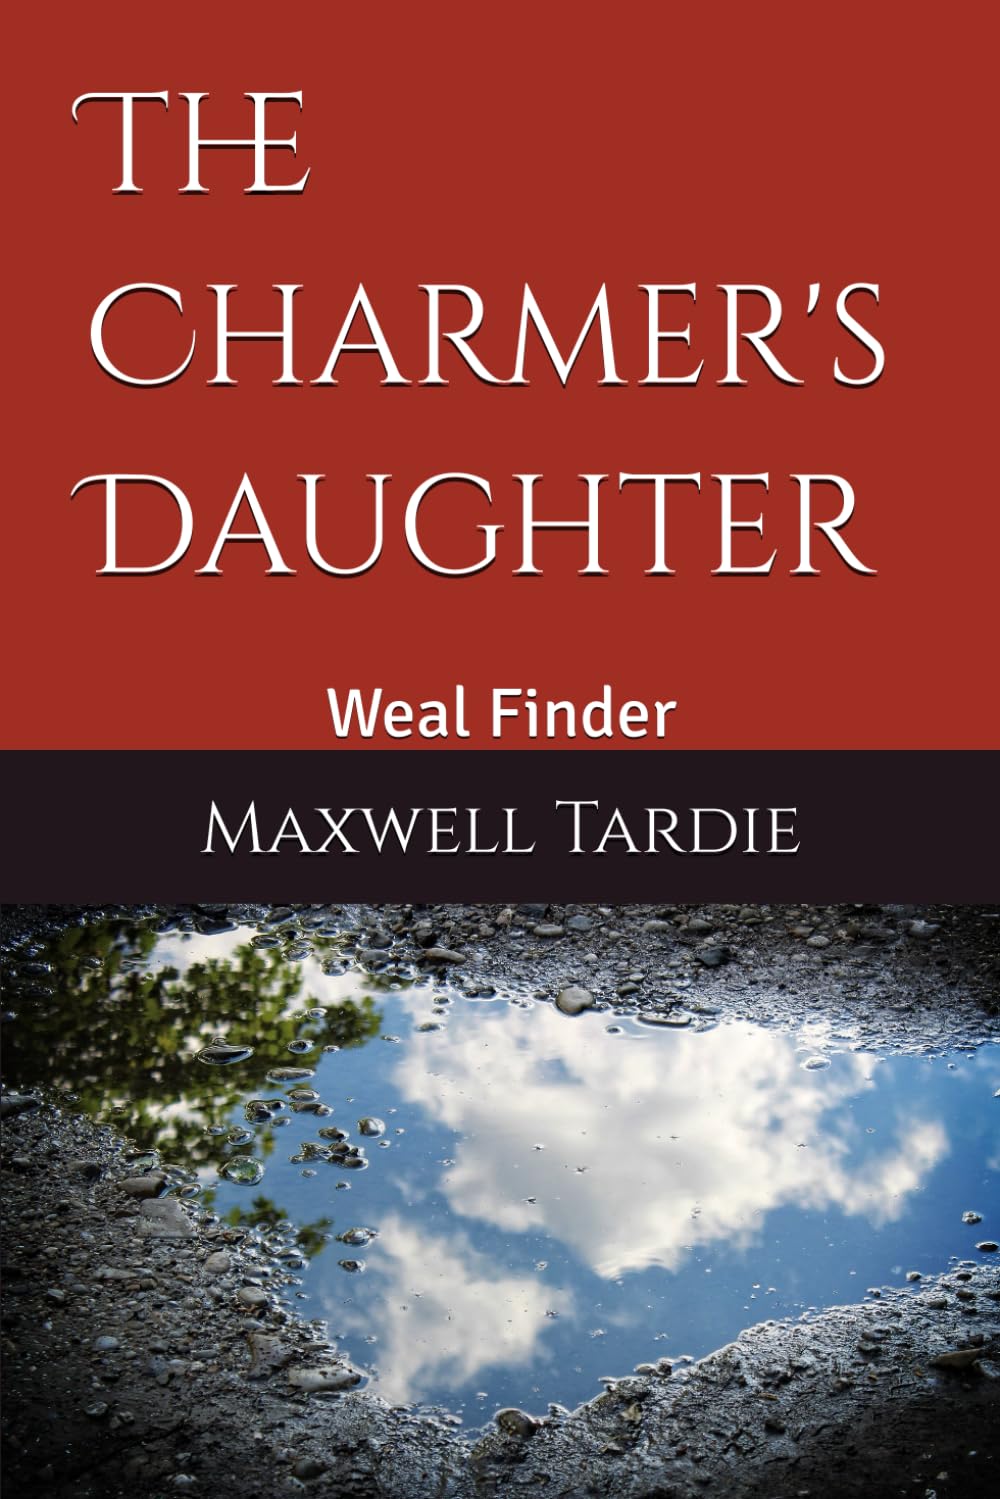 The Charmer's Daughter